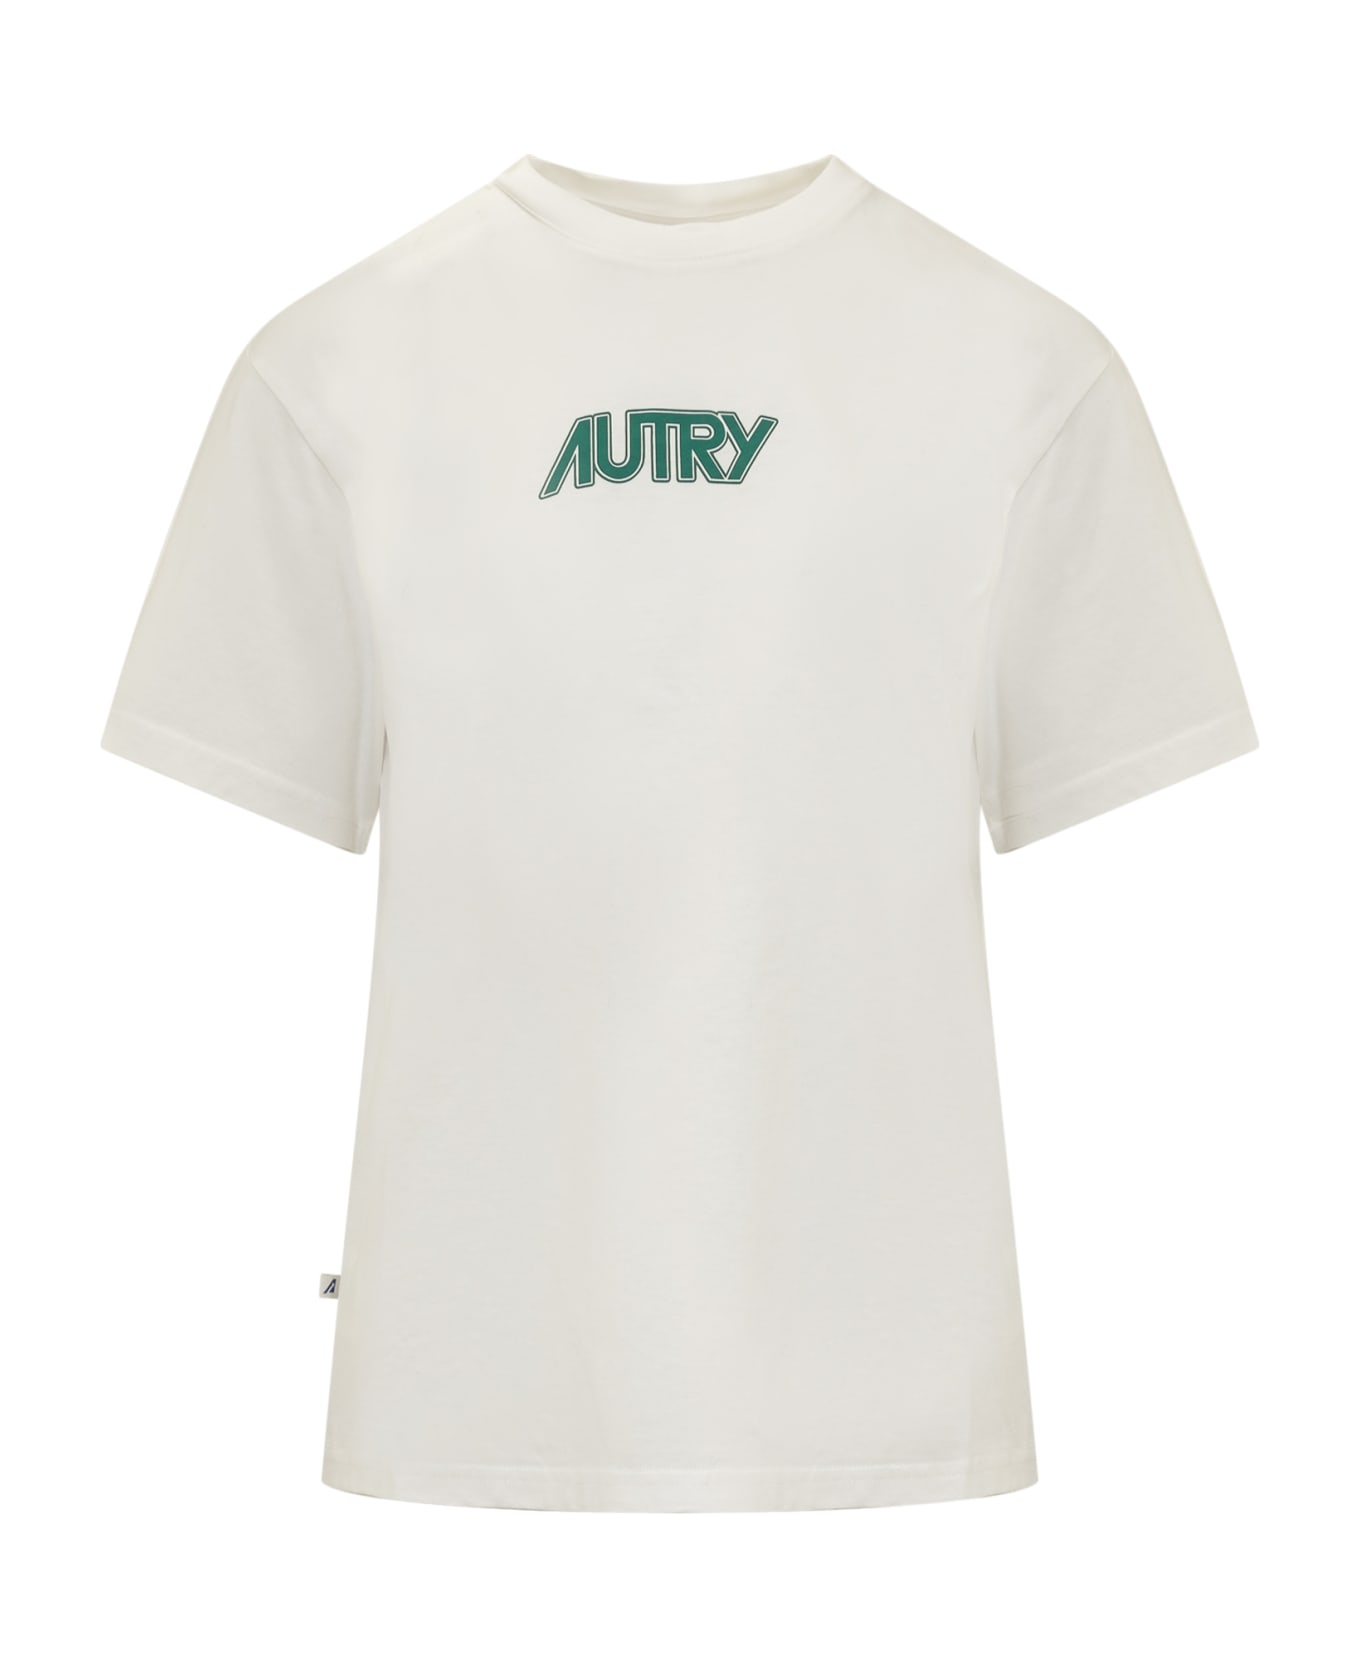 Autry T-shirt With Printed Logo - APPAREL WHITE Tシャツ